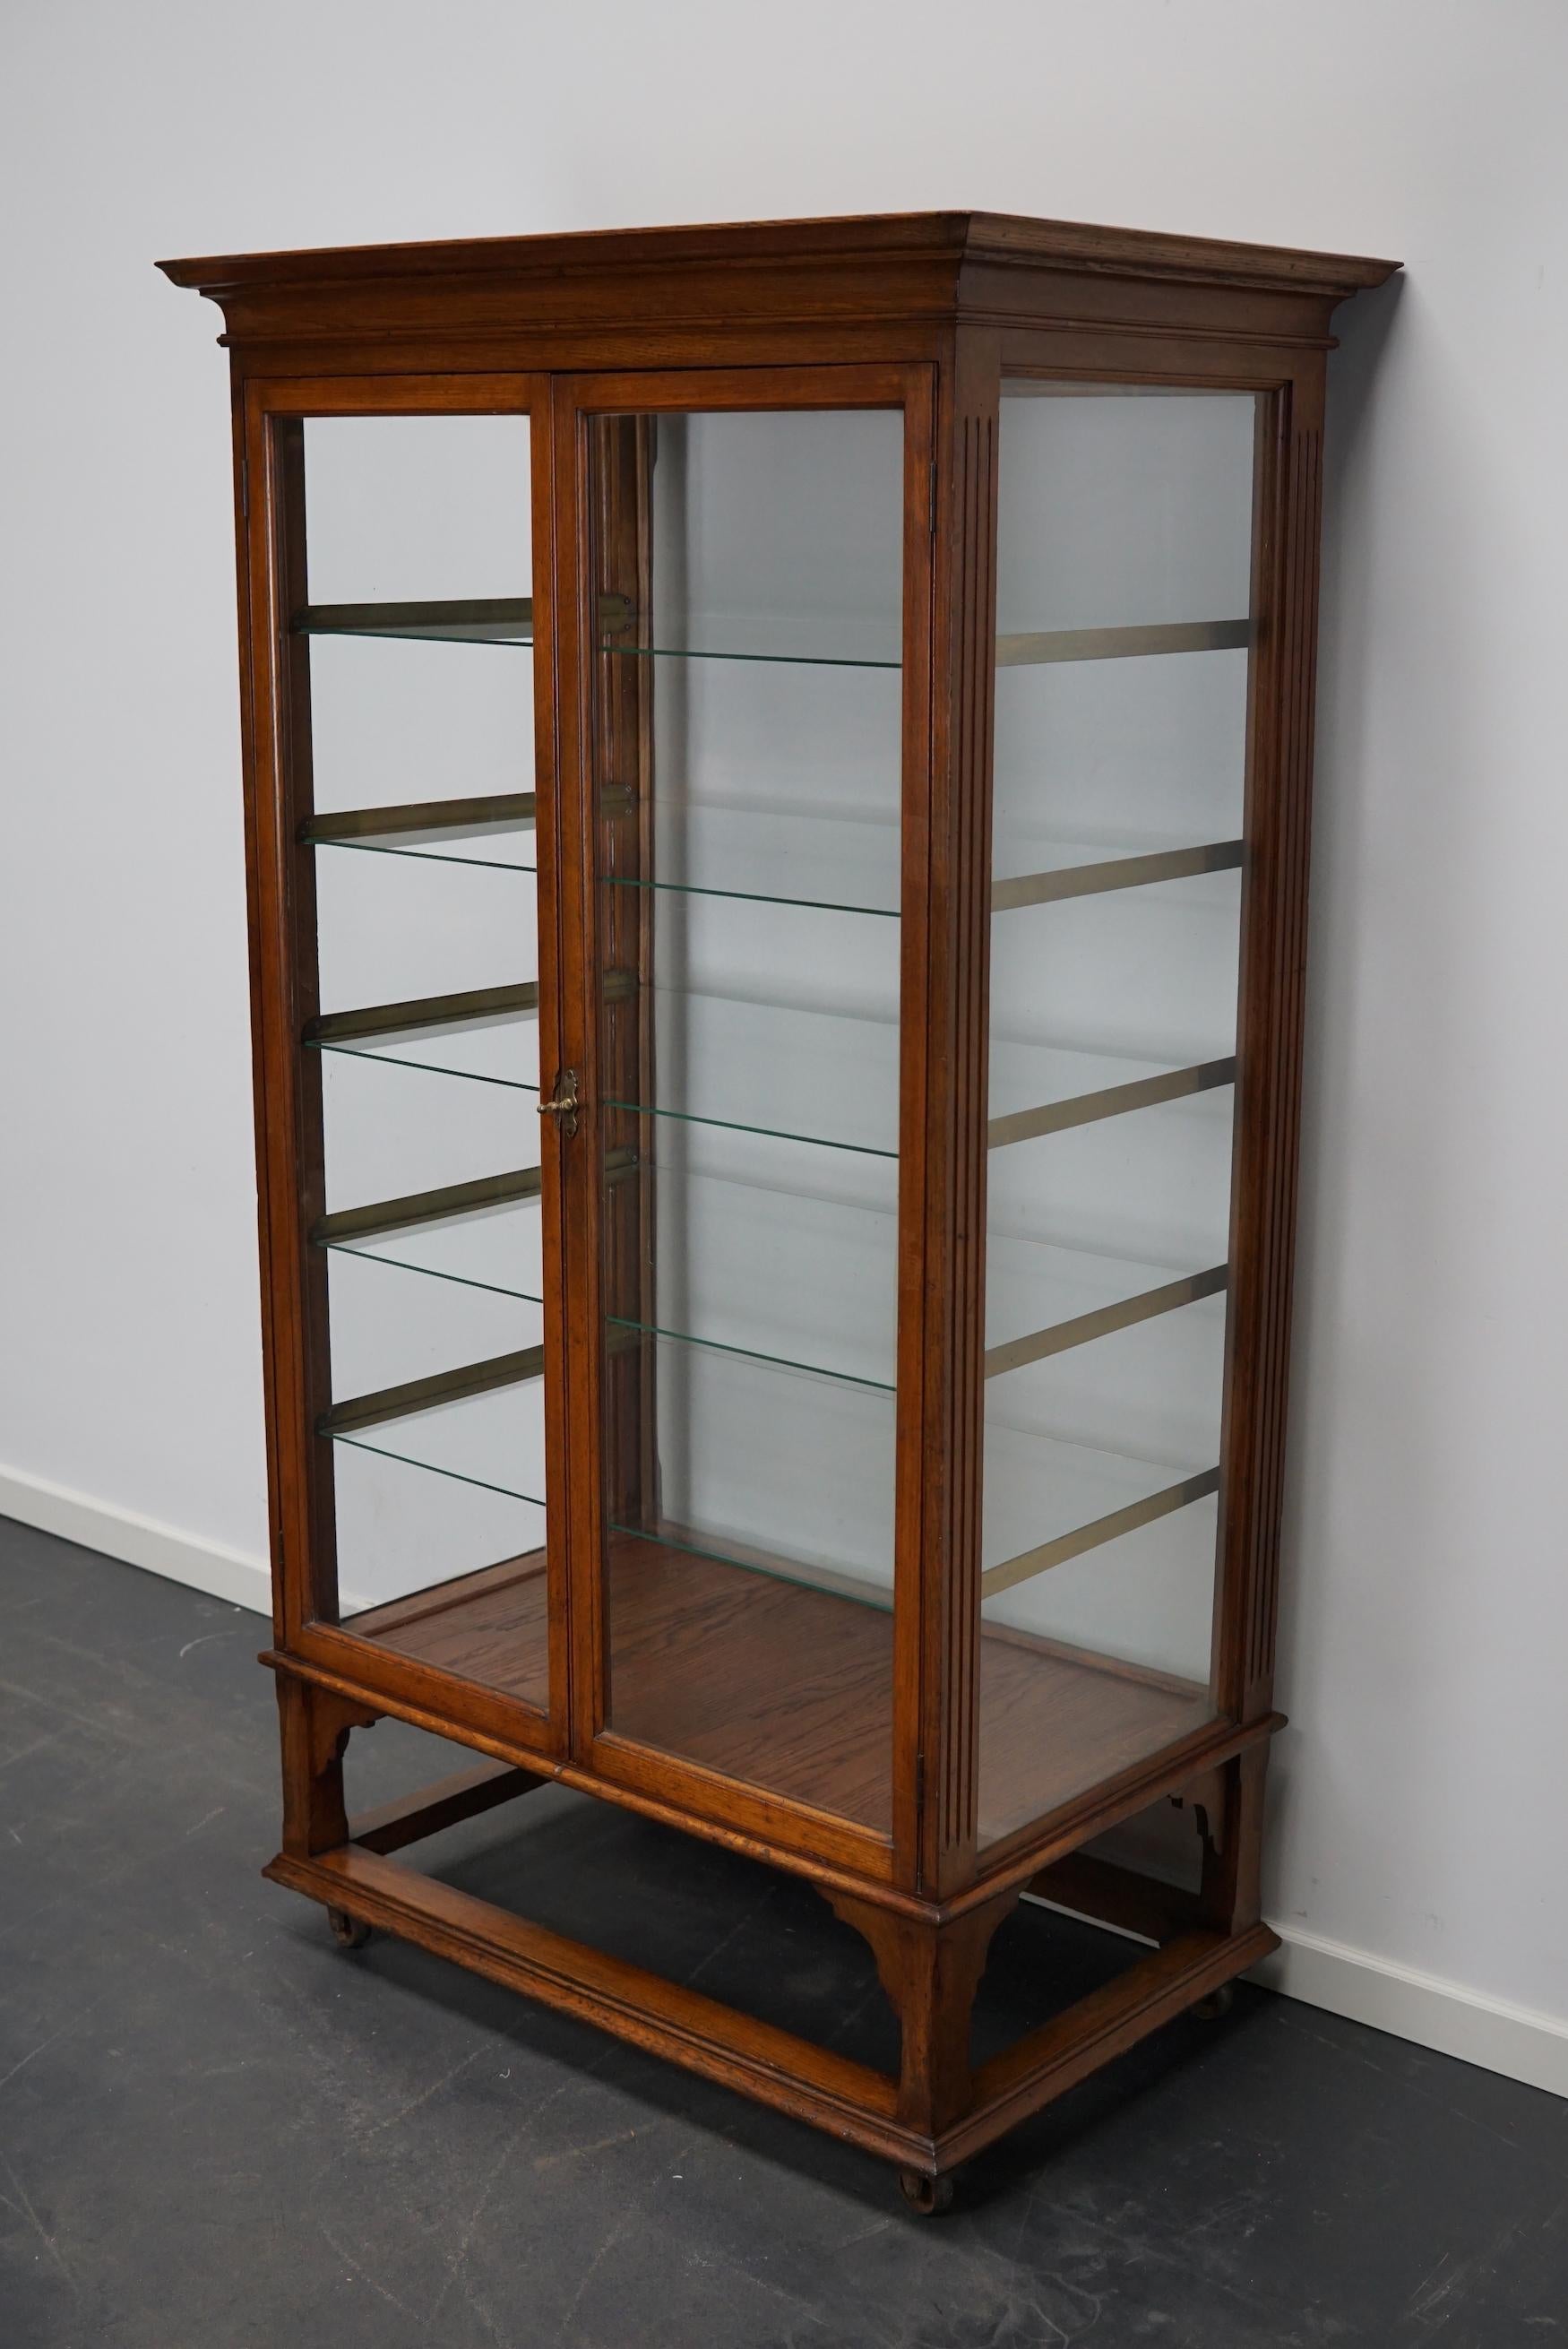 This very special antique oak bakery cabinet was made in the late 19th century. It was used to display and store pies in a bakery. It has two doors with a brass handle / lock, 5 glass shelves on brass shelve holders and glass all around. The vitrine